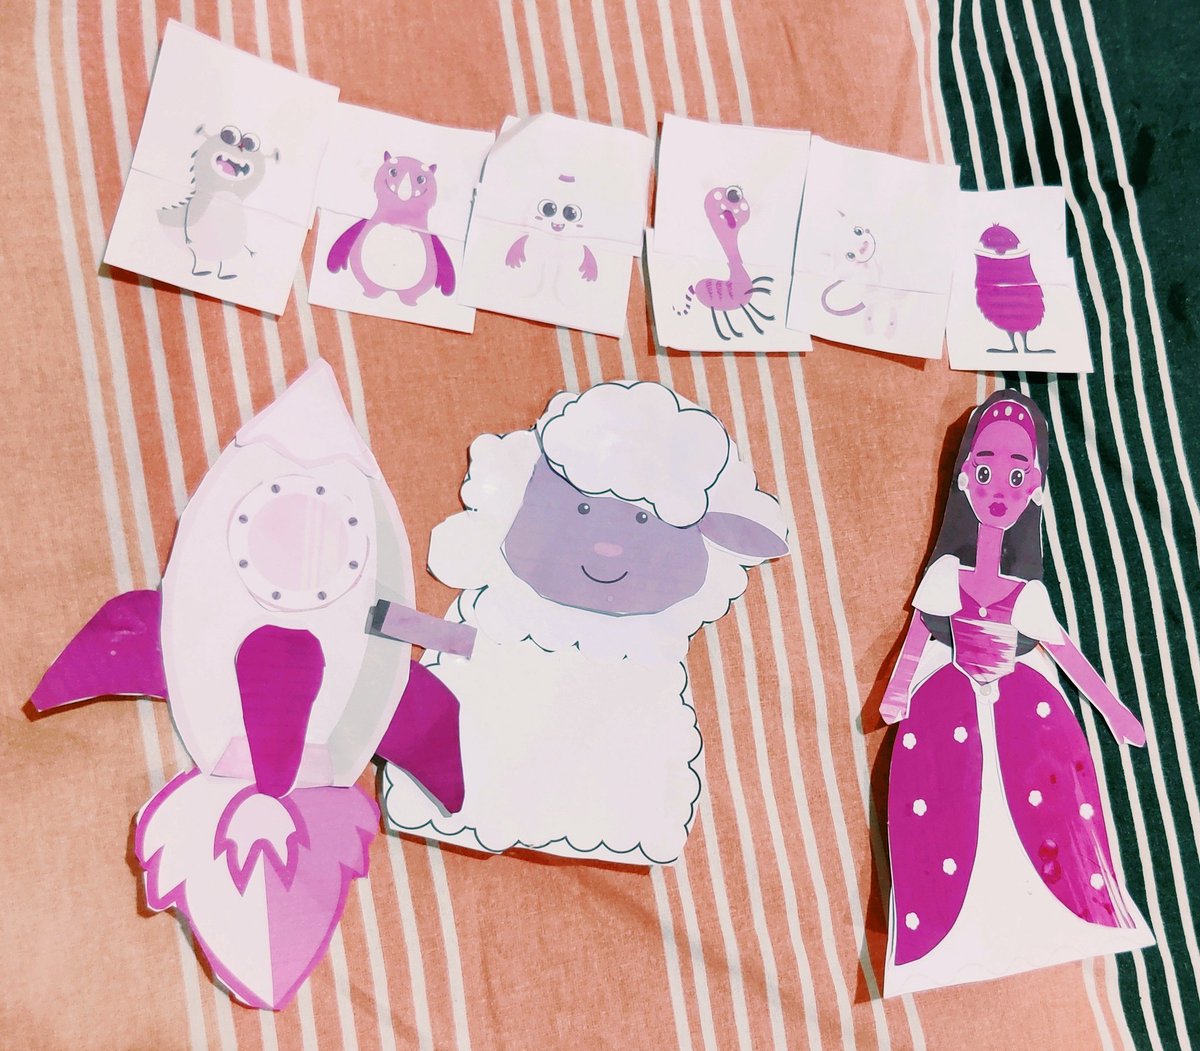 Spent 2 hours on this cut and paste activity. Searching, printing, cutting, pasting.

2 screwups: printer ran out of ink so everything is pink😂

And somewhere we ended up losing one ear and one hand of the sheep, so the poor thing is challenged!😛😛

#familytime #craftactivity